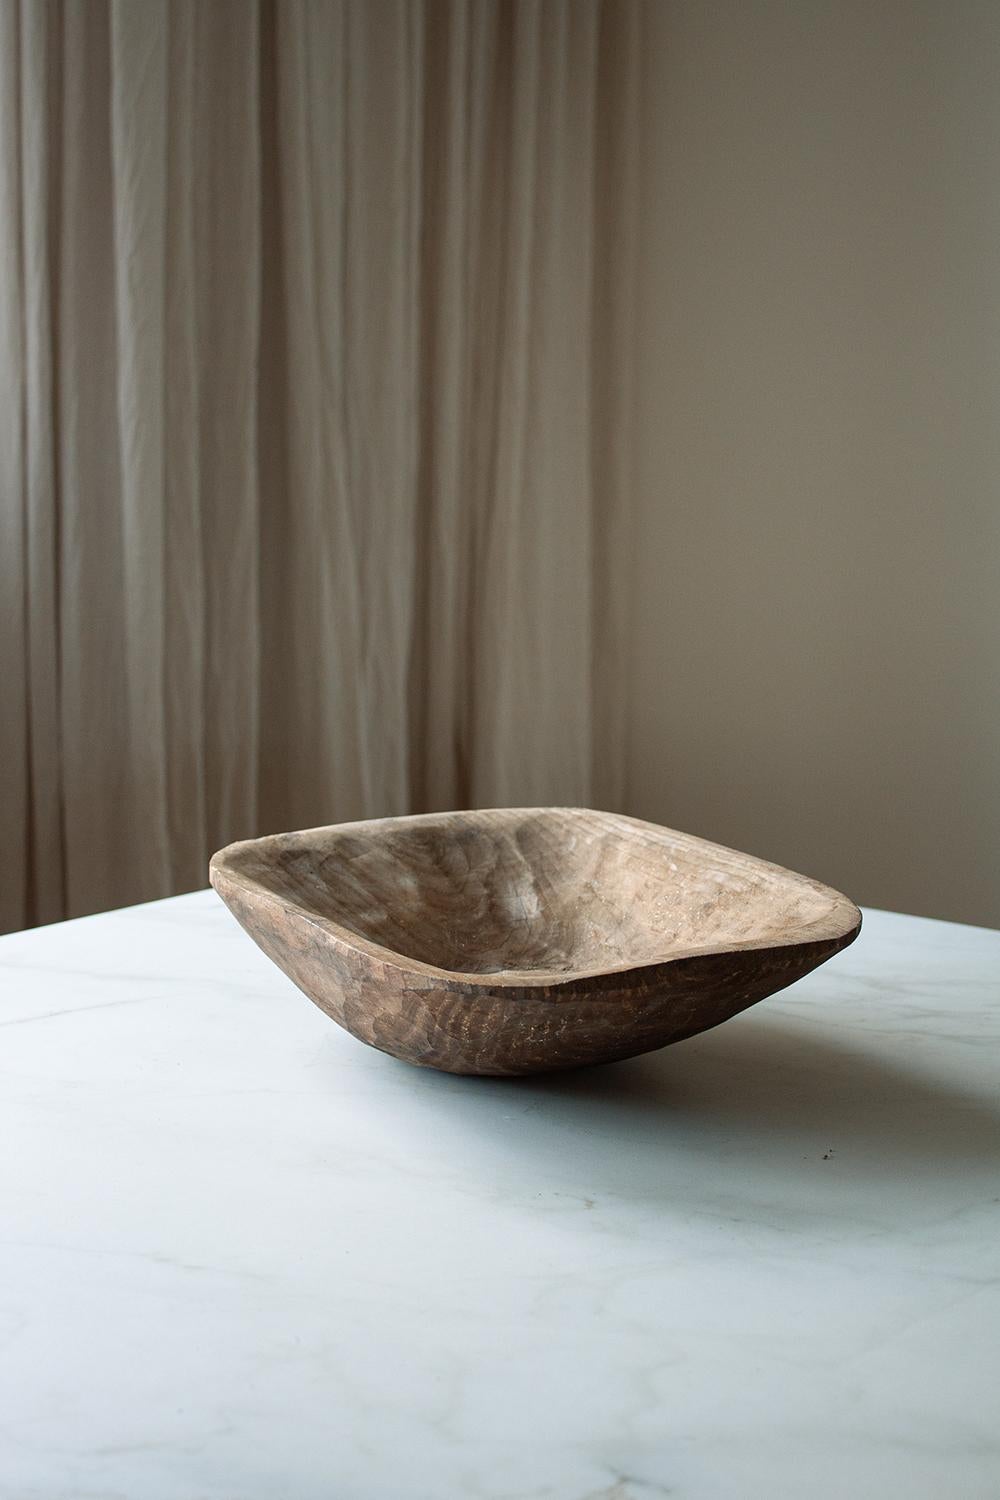 This Bowl is a blend of rustic charm and wood craftsmanship. Handcrafted by french traditional woodworkers, each bowl is a unique piece that captures the essence of french provincial style. (This bowl is one out of a set of 4, which are available in